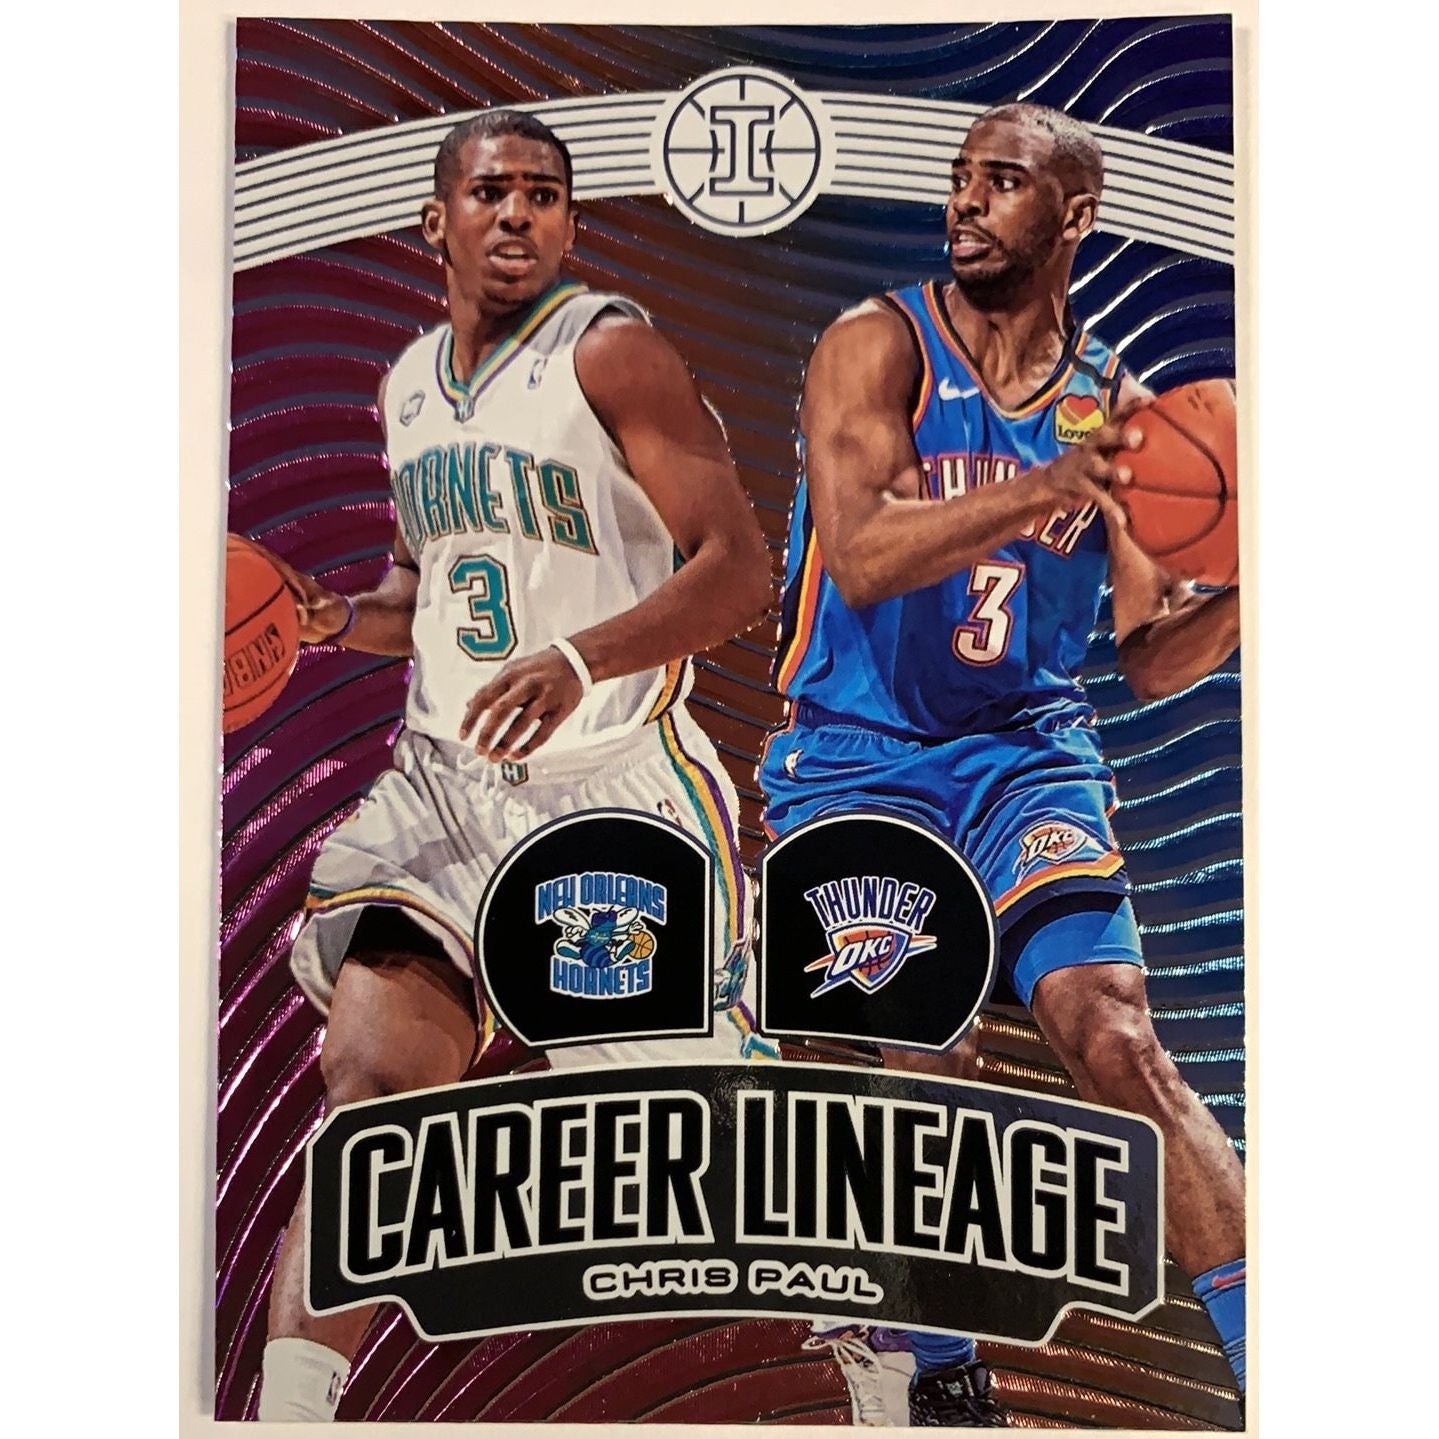  2019-20 Illusions Career Lineage Chris Paul  Local Legends Cards & Collectibles